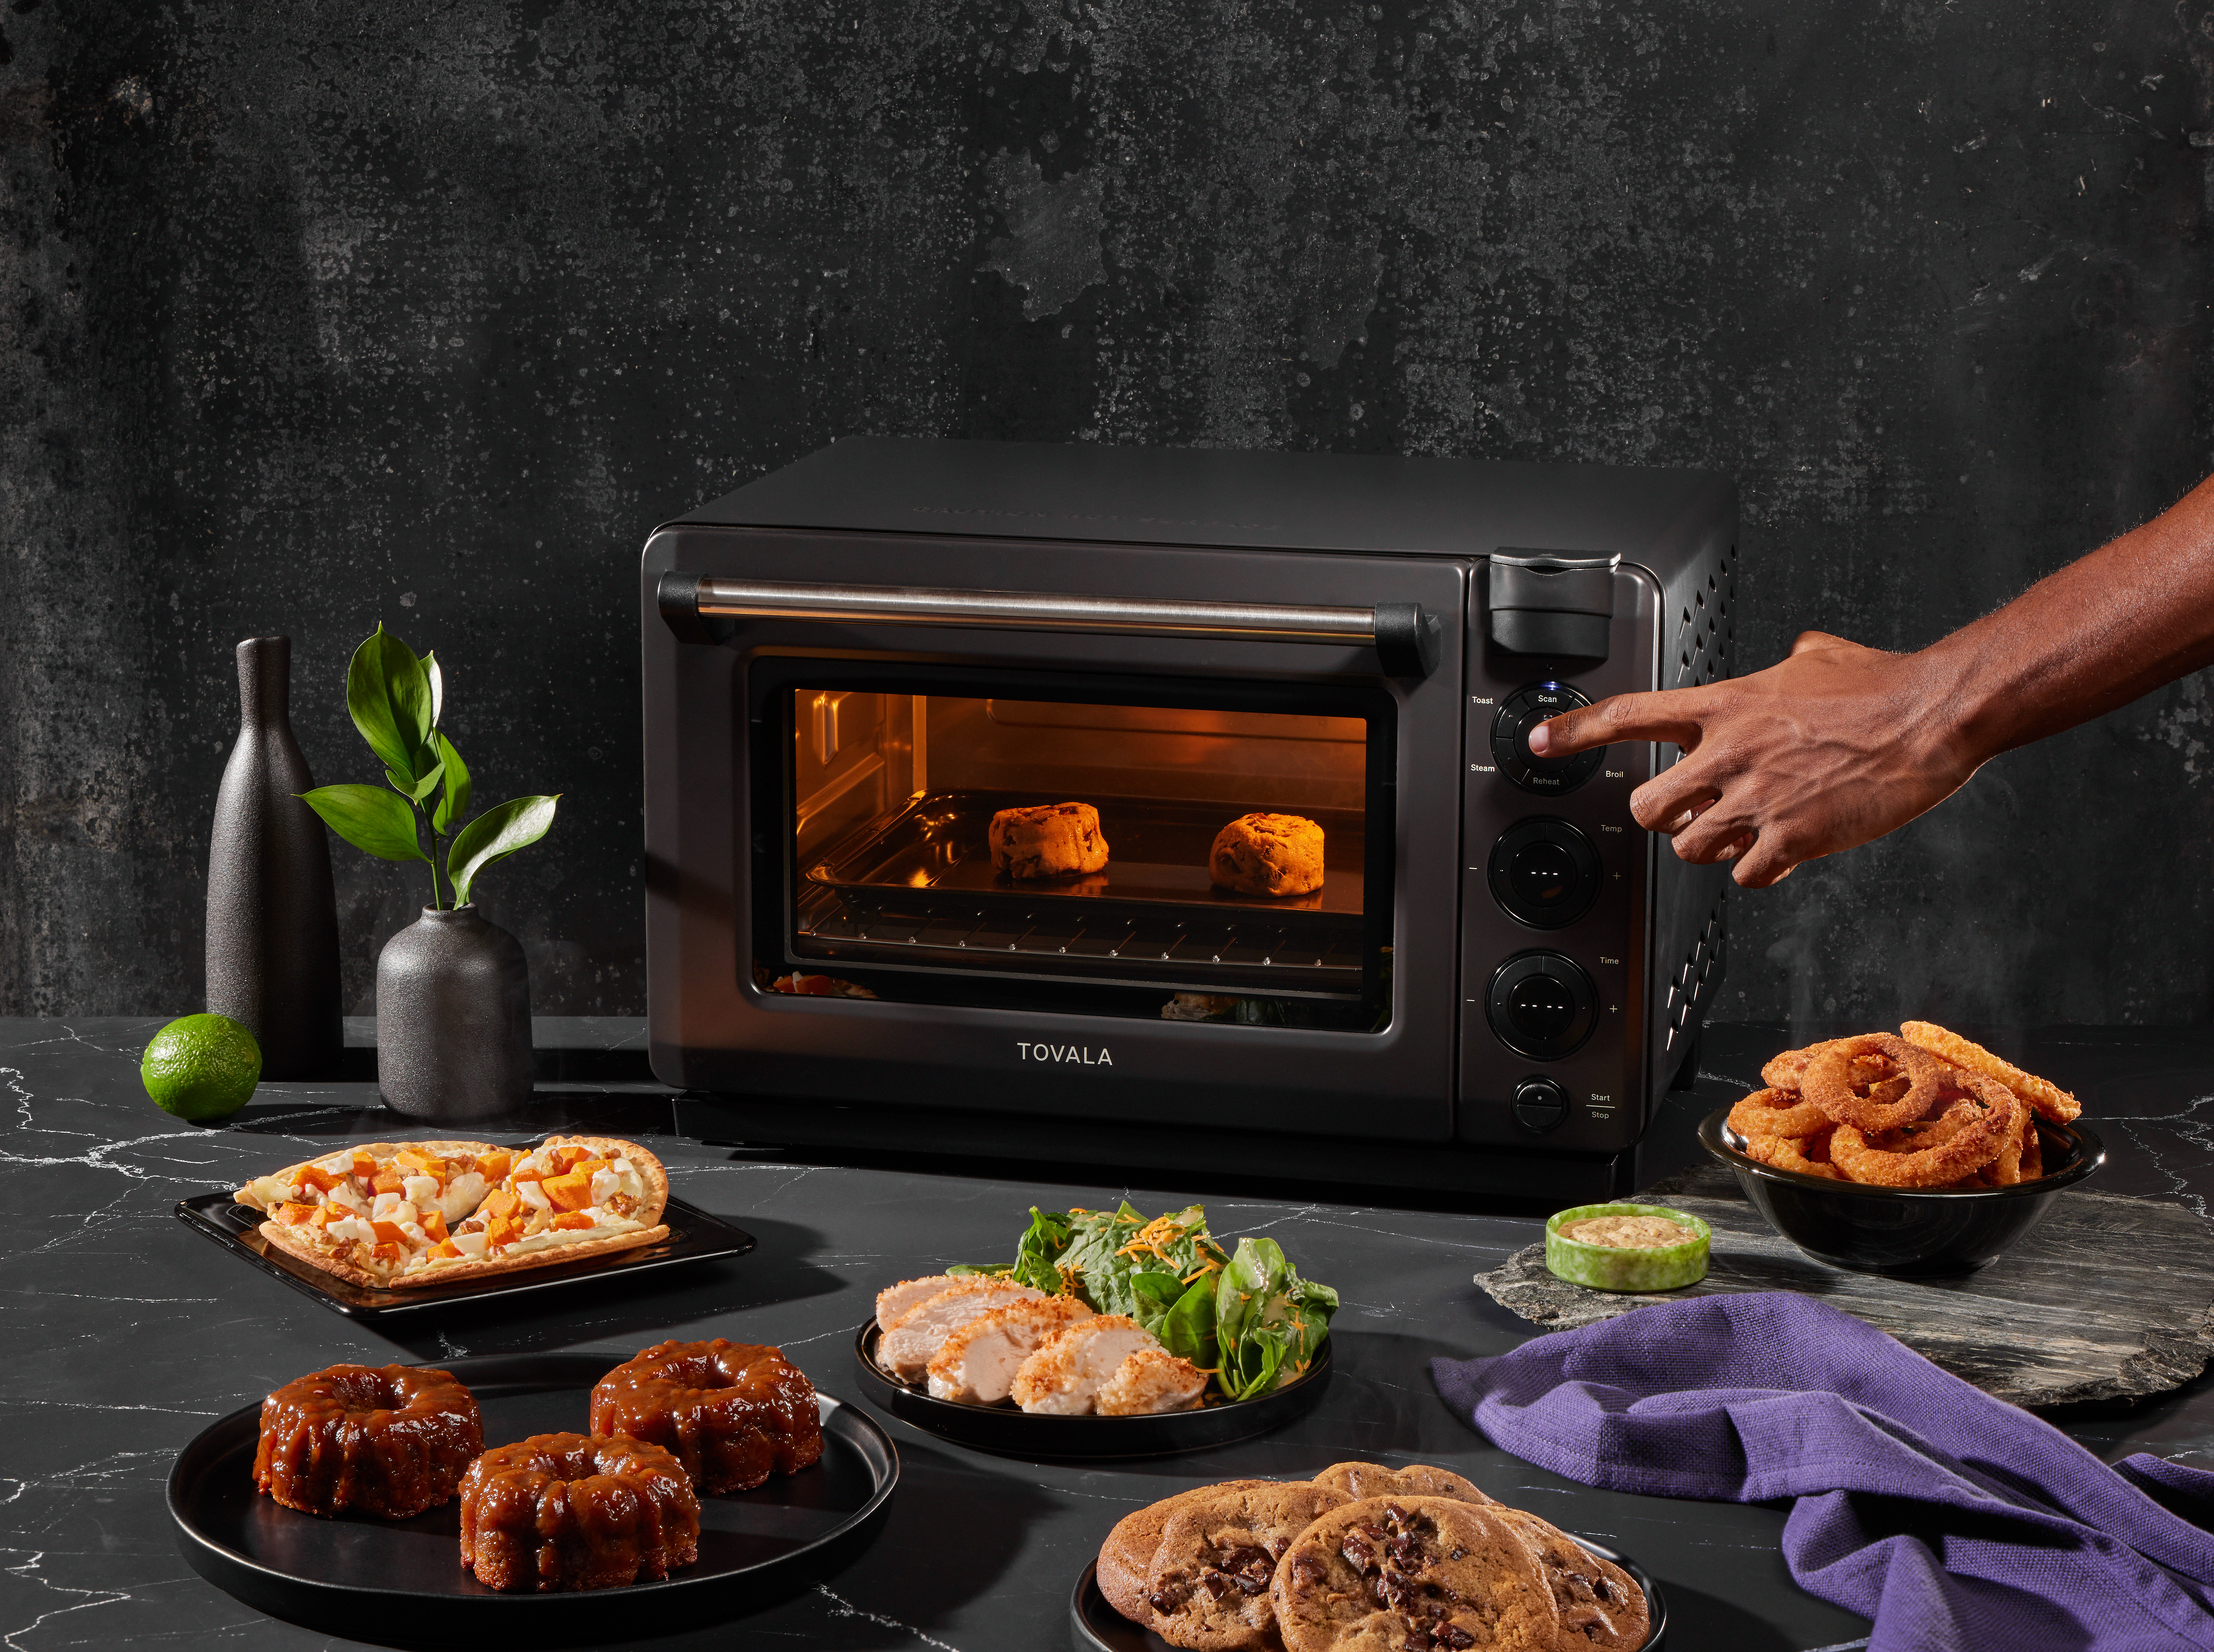 Ready to Cook Smarter? Shop Tovala’s Incredible Deal and Save Big on Meals